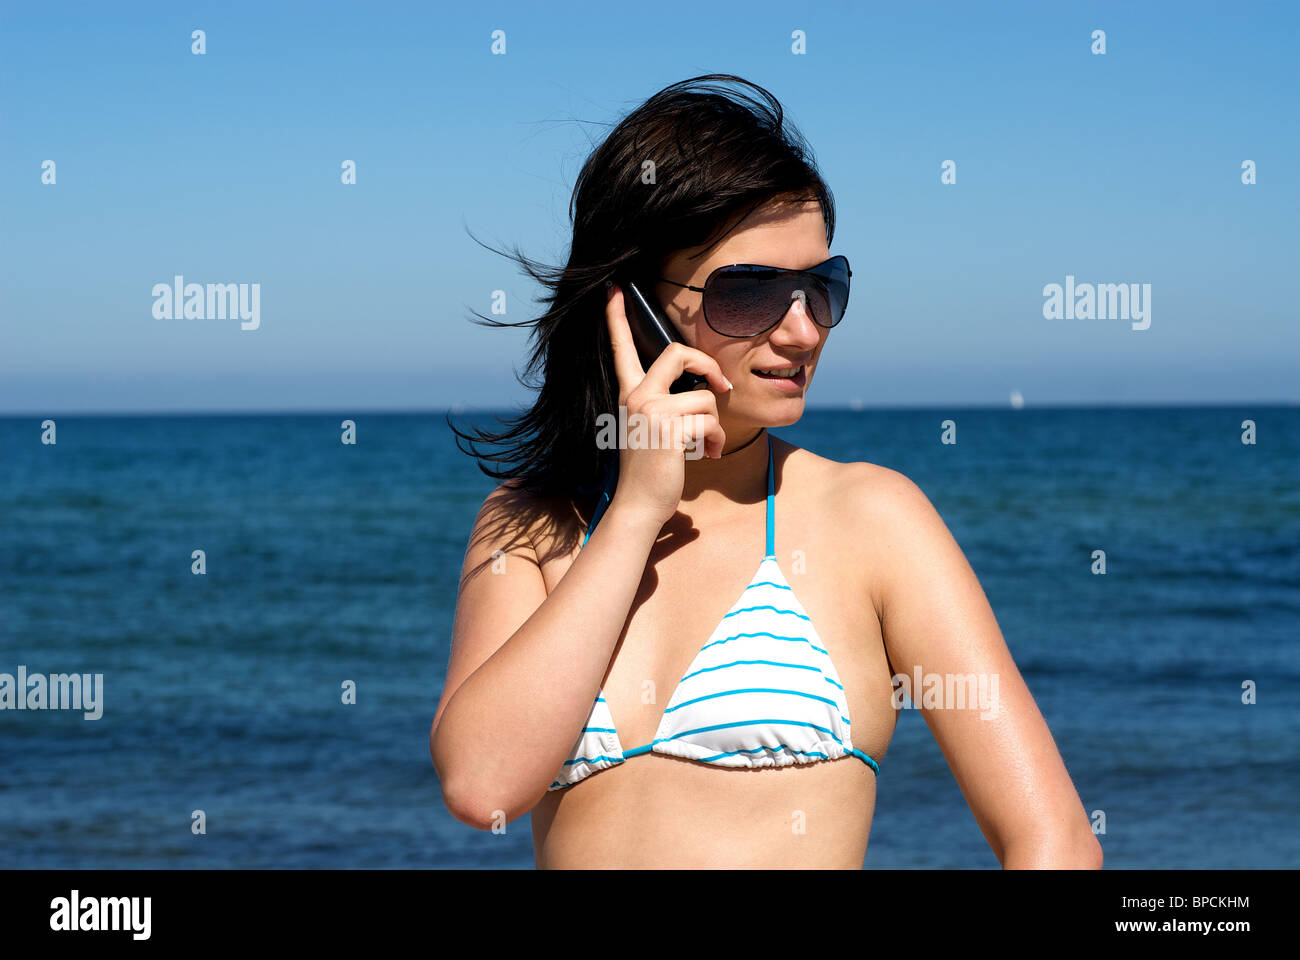 A young woman speaking on the phone on a beach Stock Photo